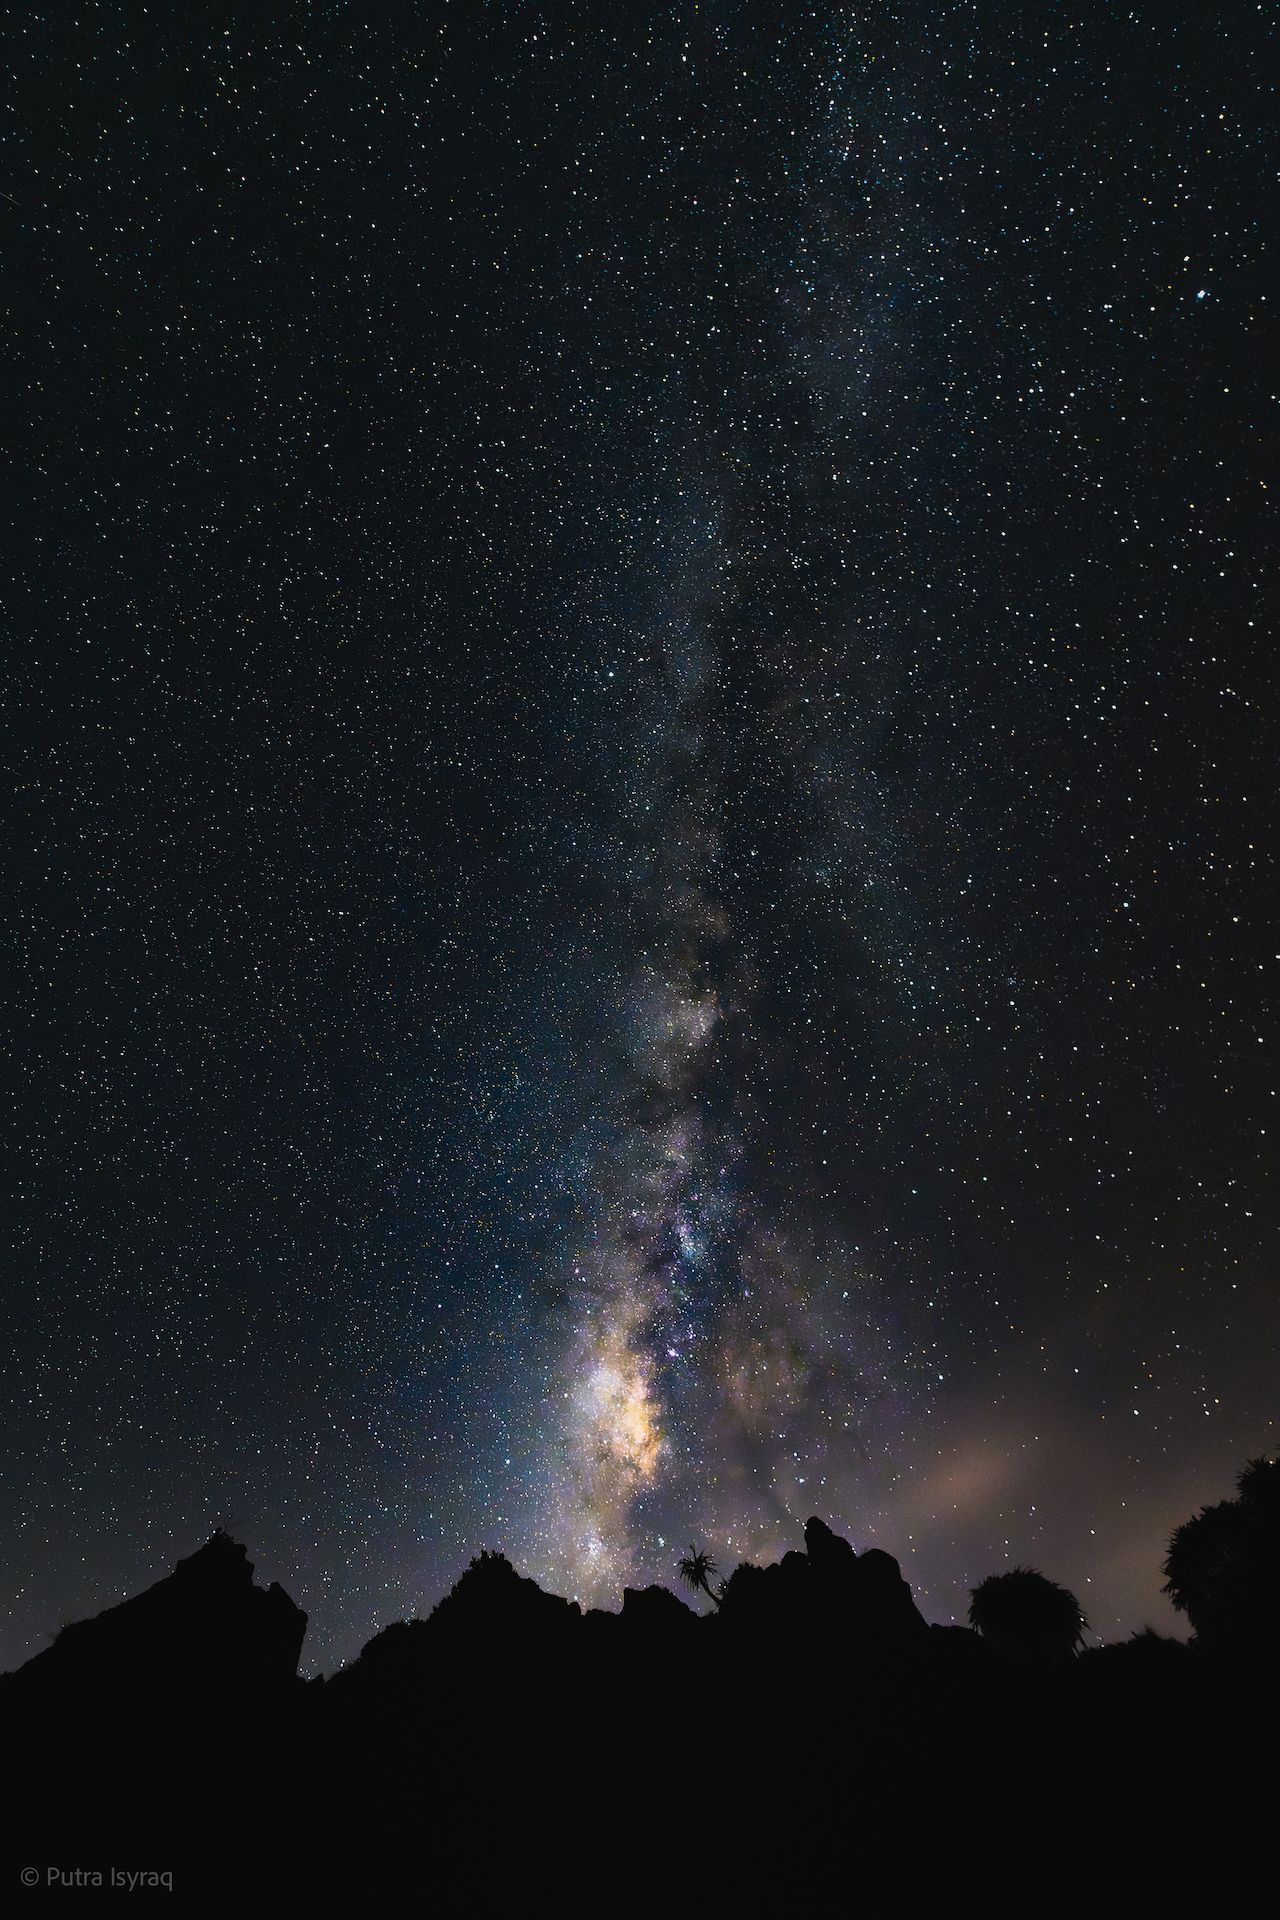 I took epic Milky Way photos, here's what I learnt